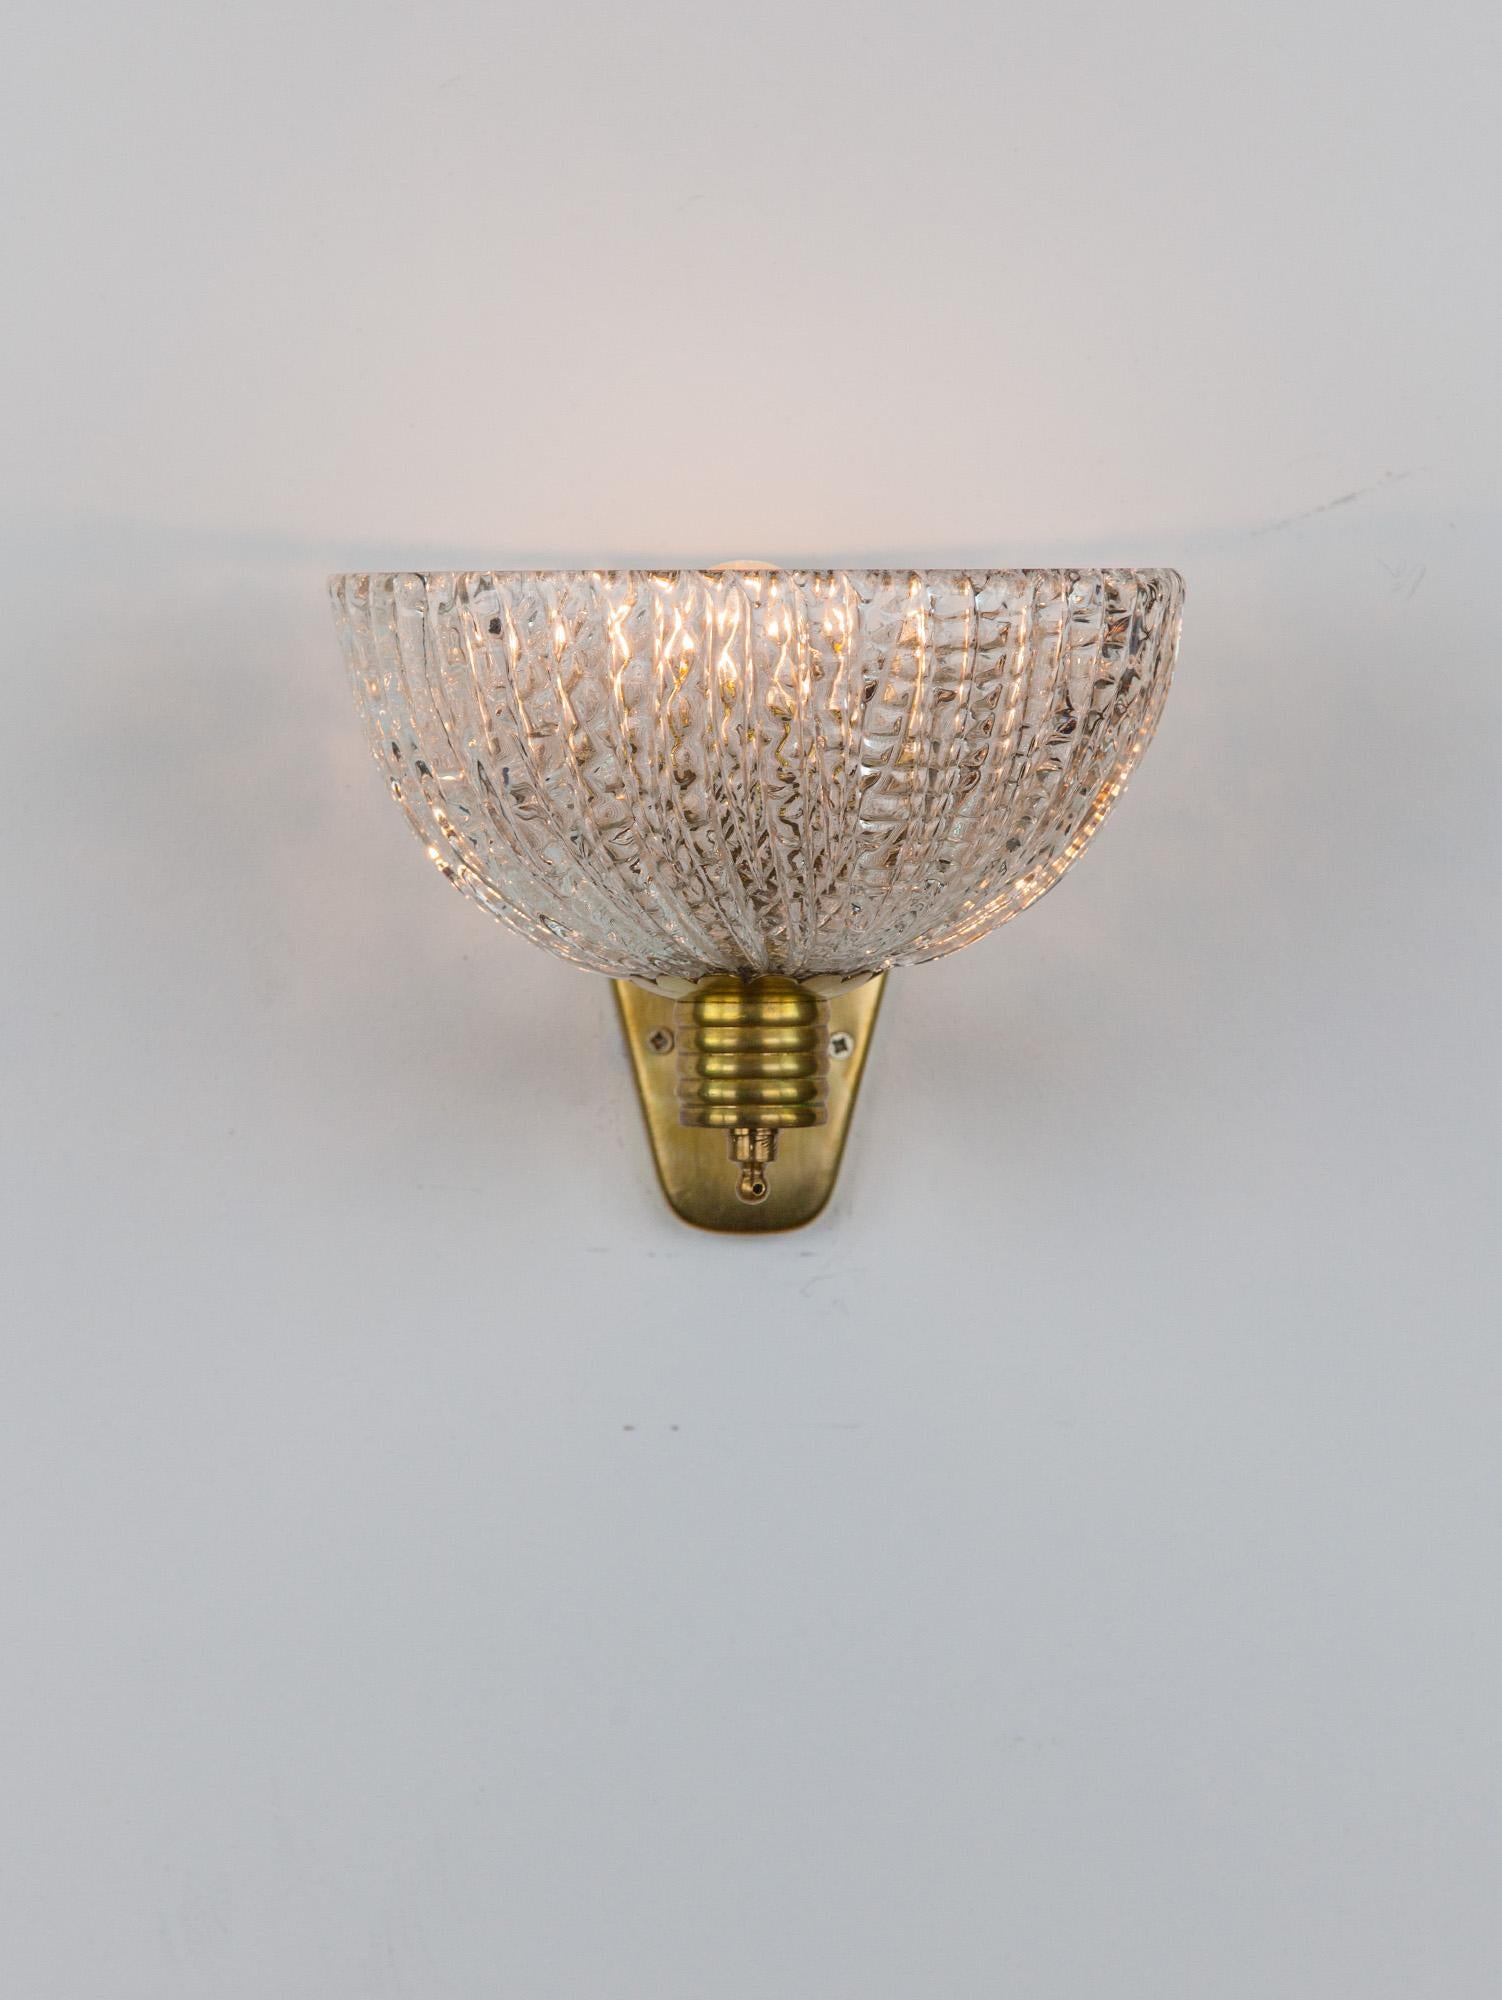 Lovely Italian Barovier wall light with a hemisphere Murano glass shade and wavy arm brass fixture. Impressive in its beauty and form, the textural moulded glass emits a soft ambient light. Made in Italy in the 1940s.

Great vintage condition with